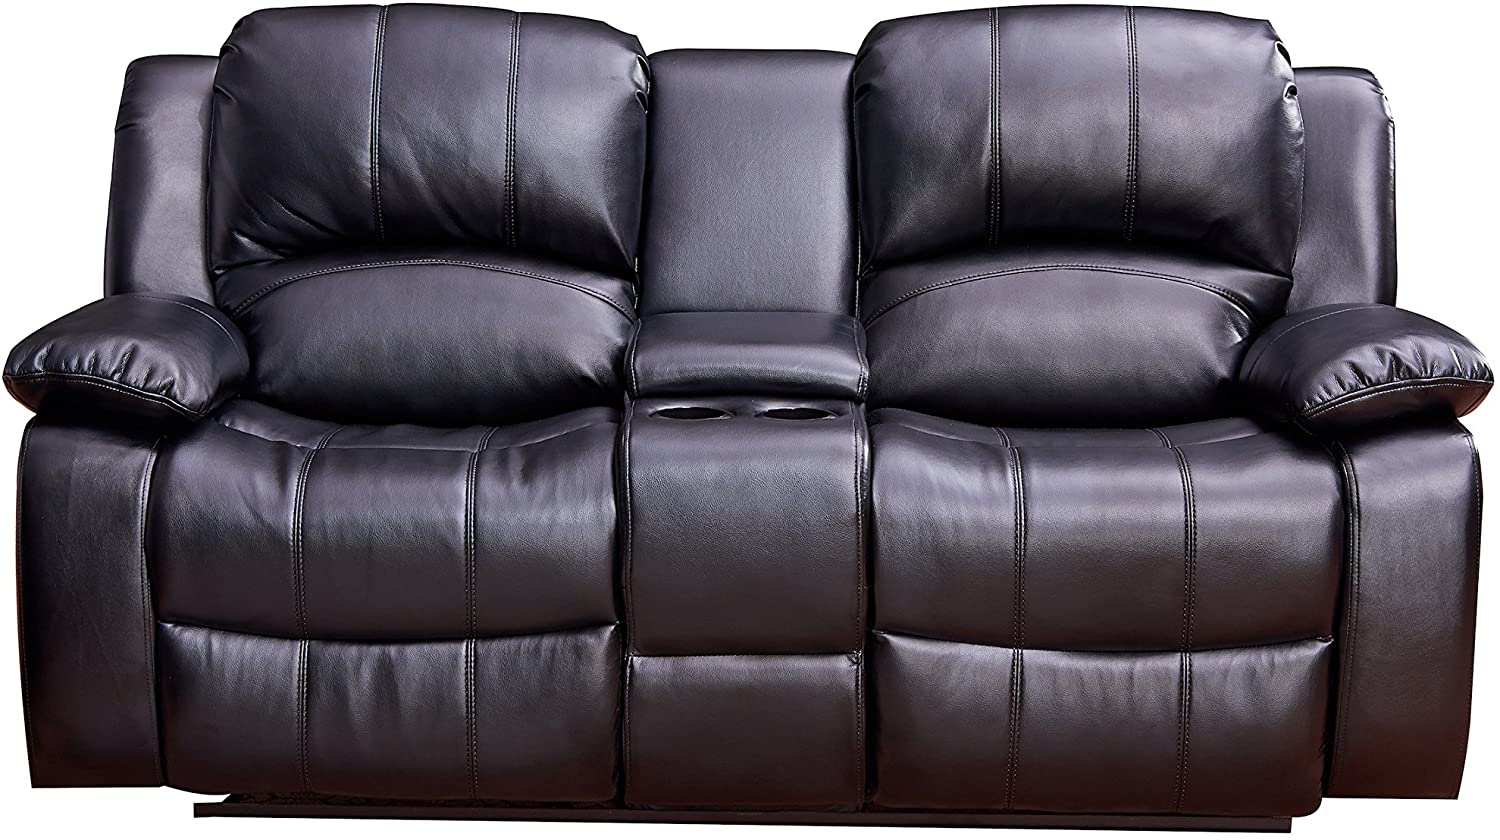 Betsy Furniture Recliner Loveseat with Console